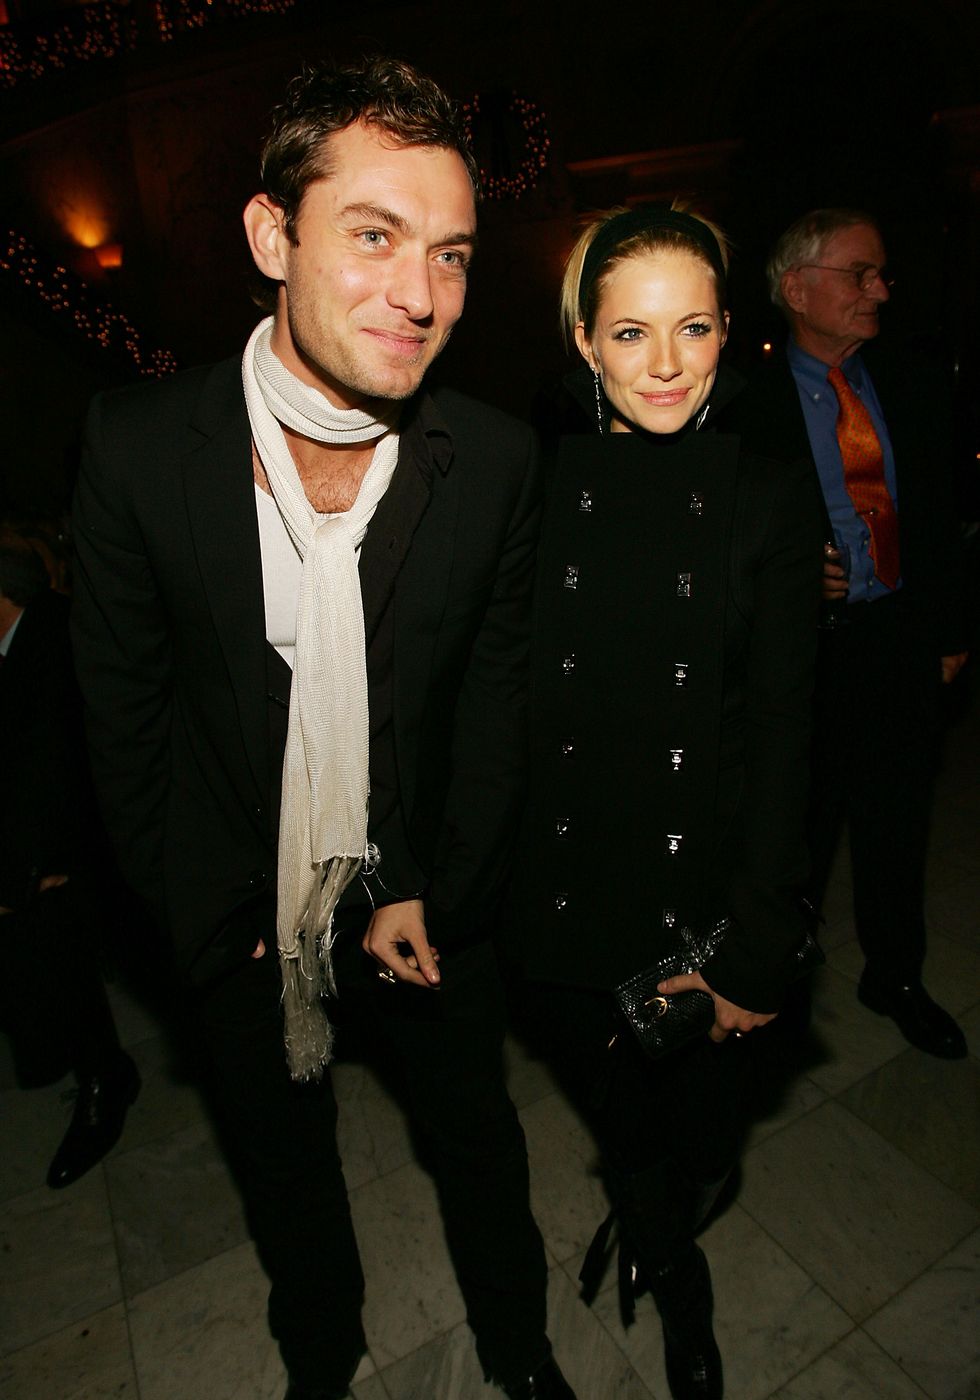 new york   december 11  hollywood reporter and us tabs out   actor jude law and actress sienna miller attend the casanova special screening after party at the metropolitan club december 11, 2005 in new york city  photo by evan agostinigetty images